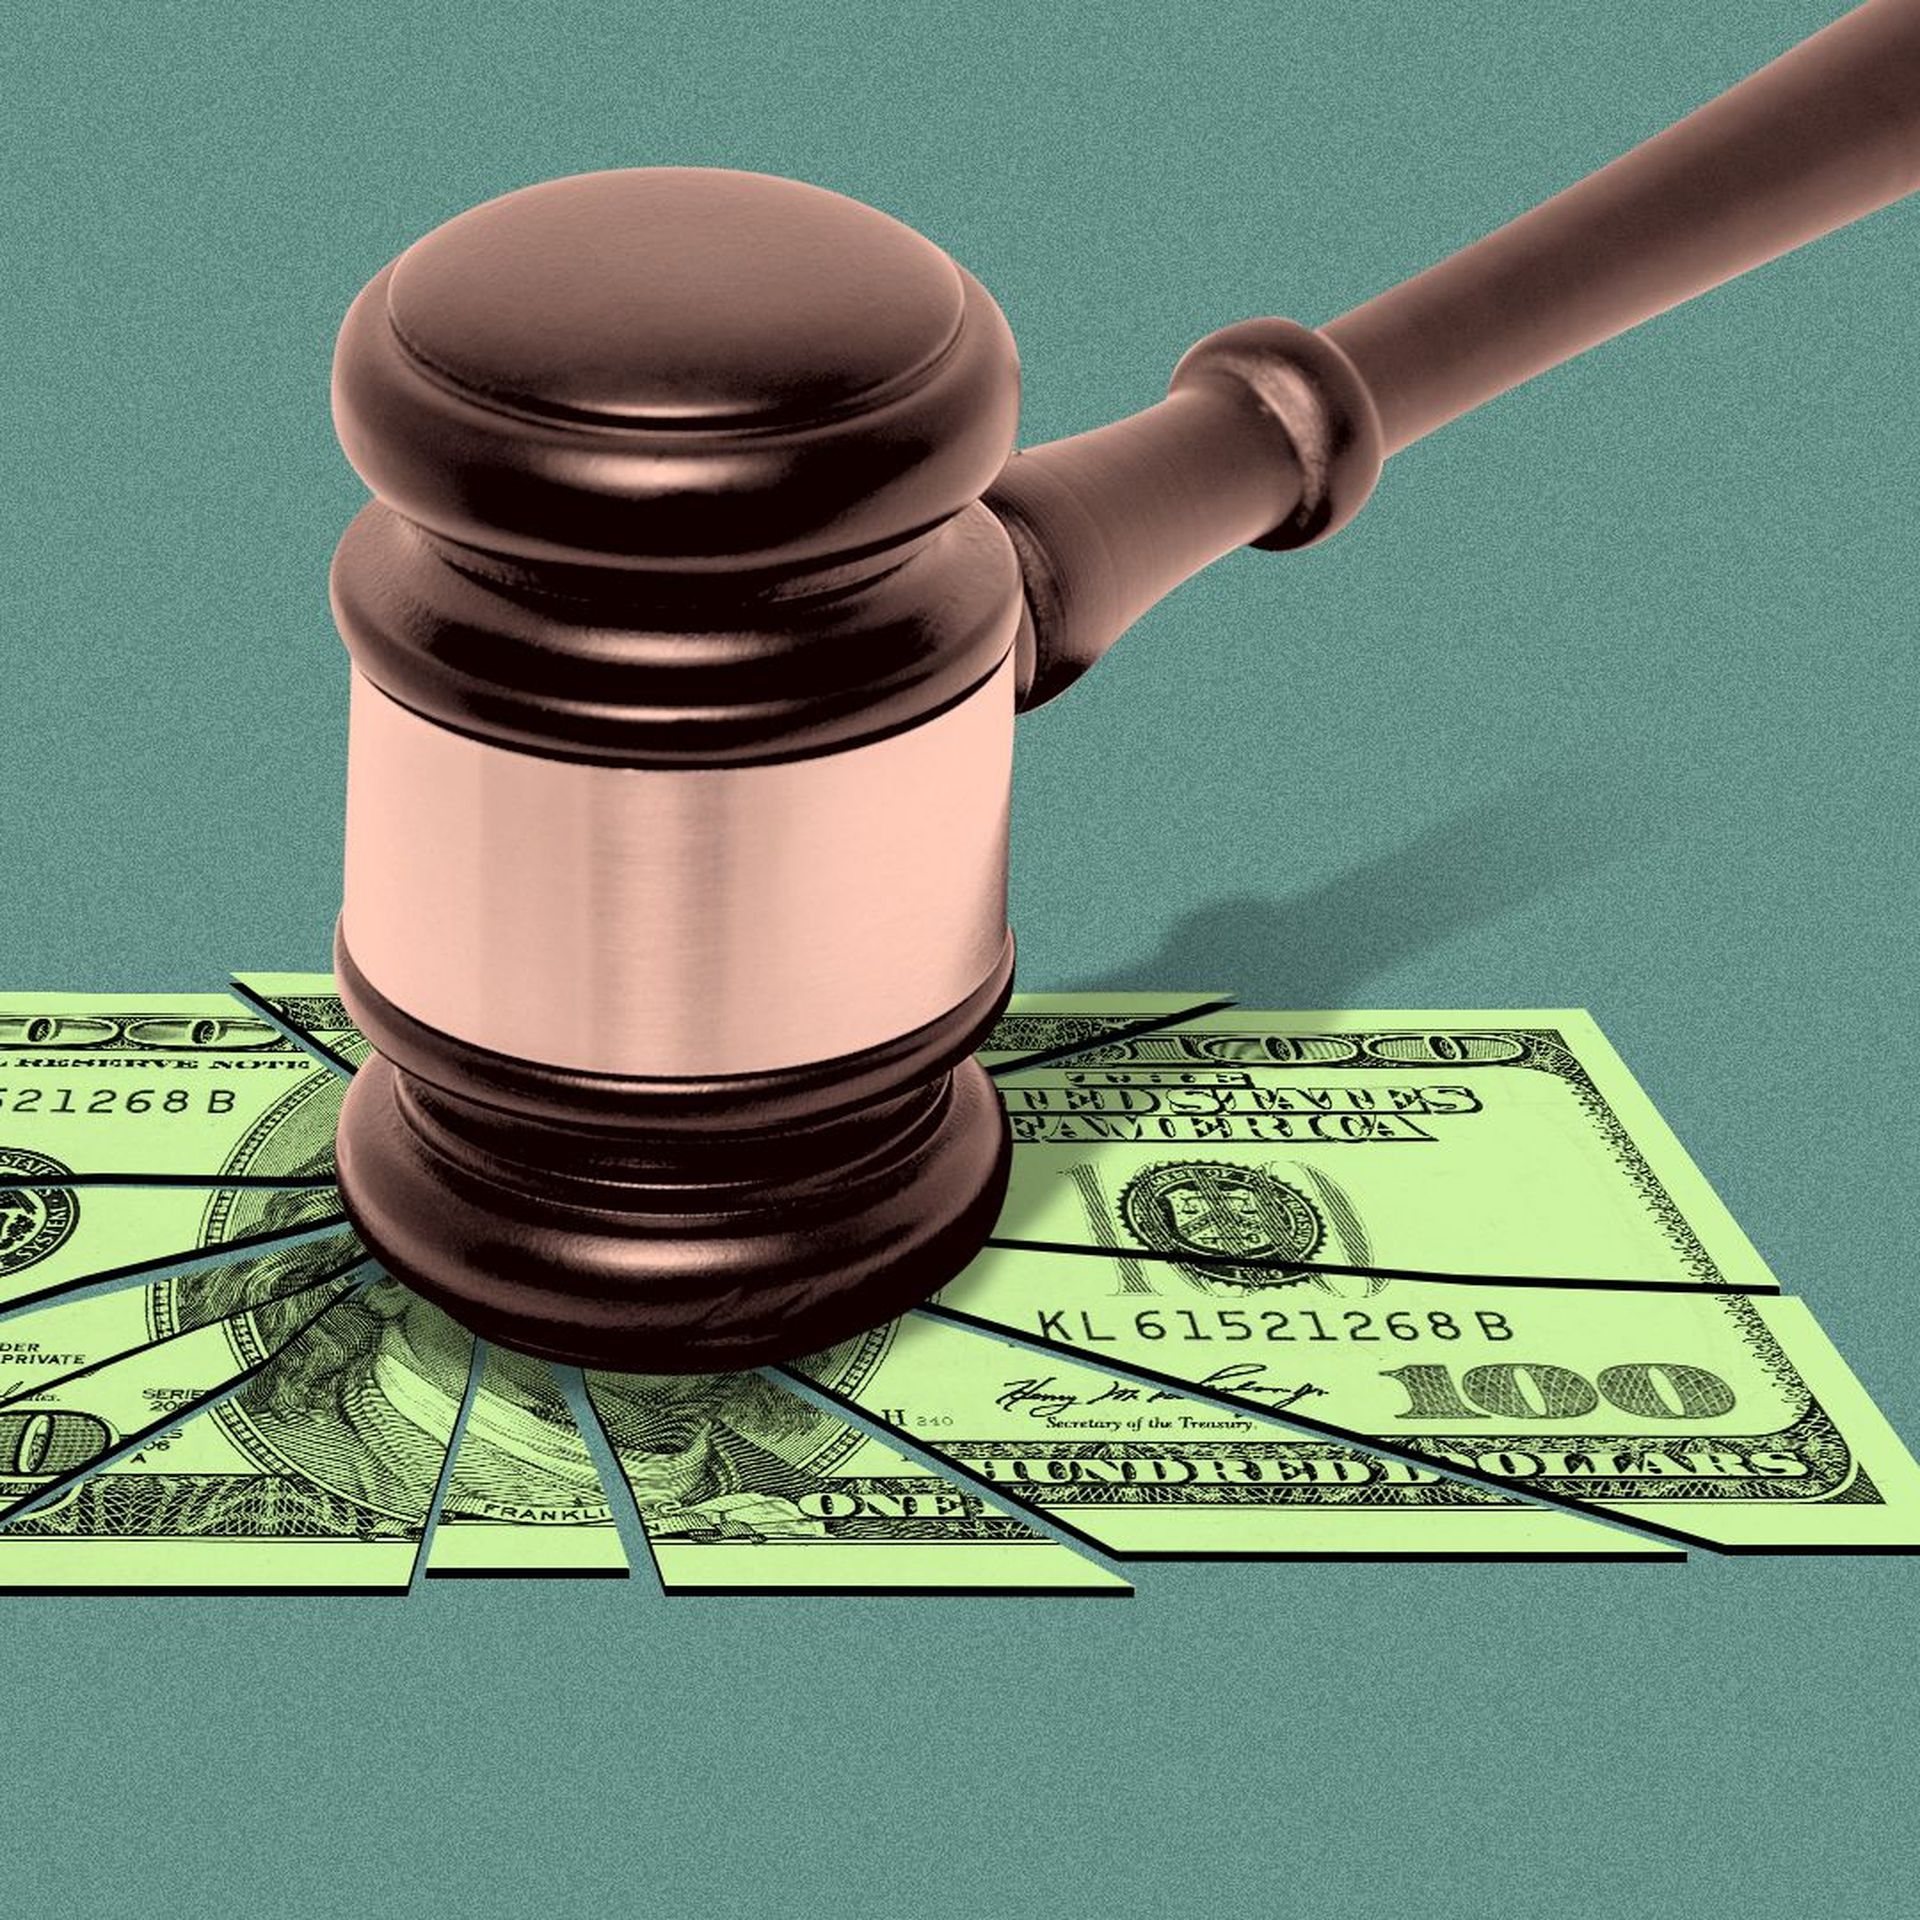 Illustration of a hundred-dollar bill being shattered by a gavel.